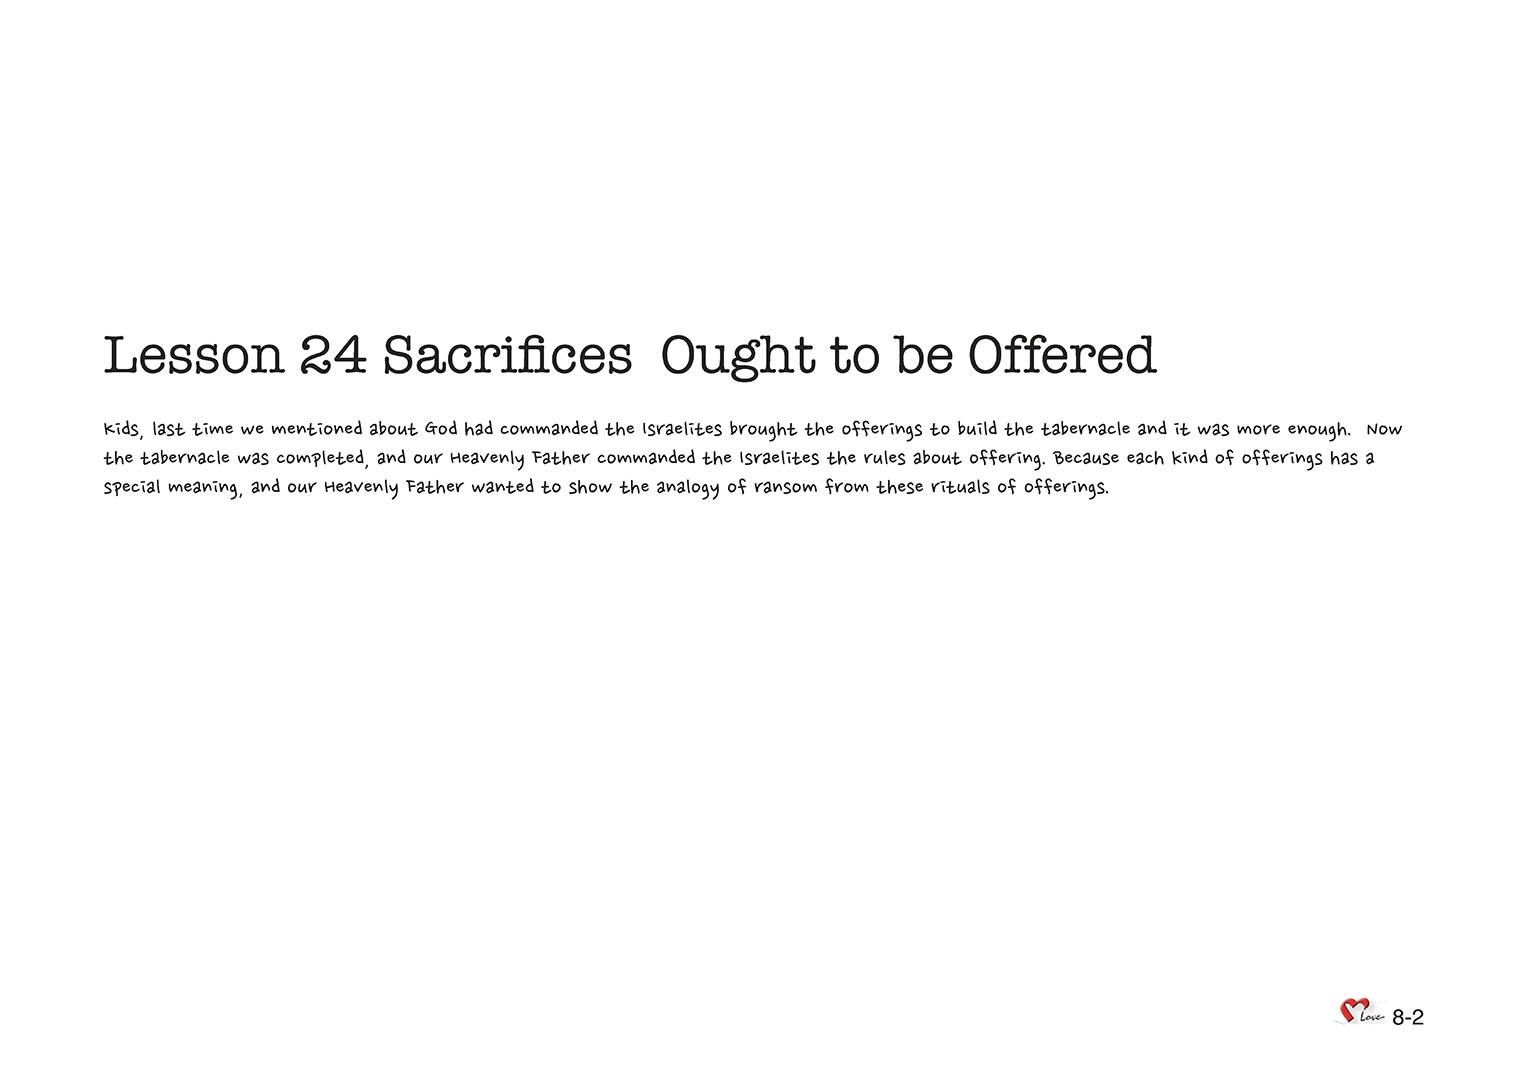 Chapter 8 - Lesson 24 - Sacrifices Ought to be Offered